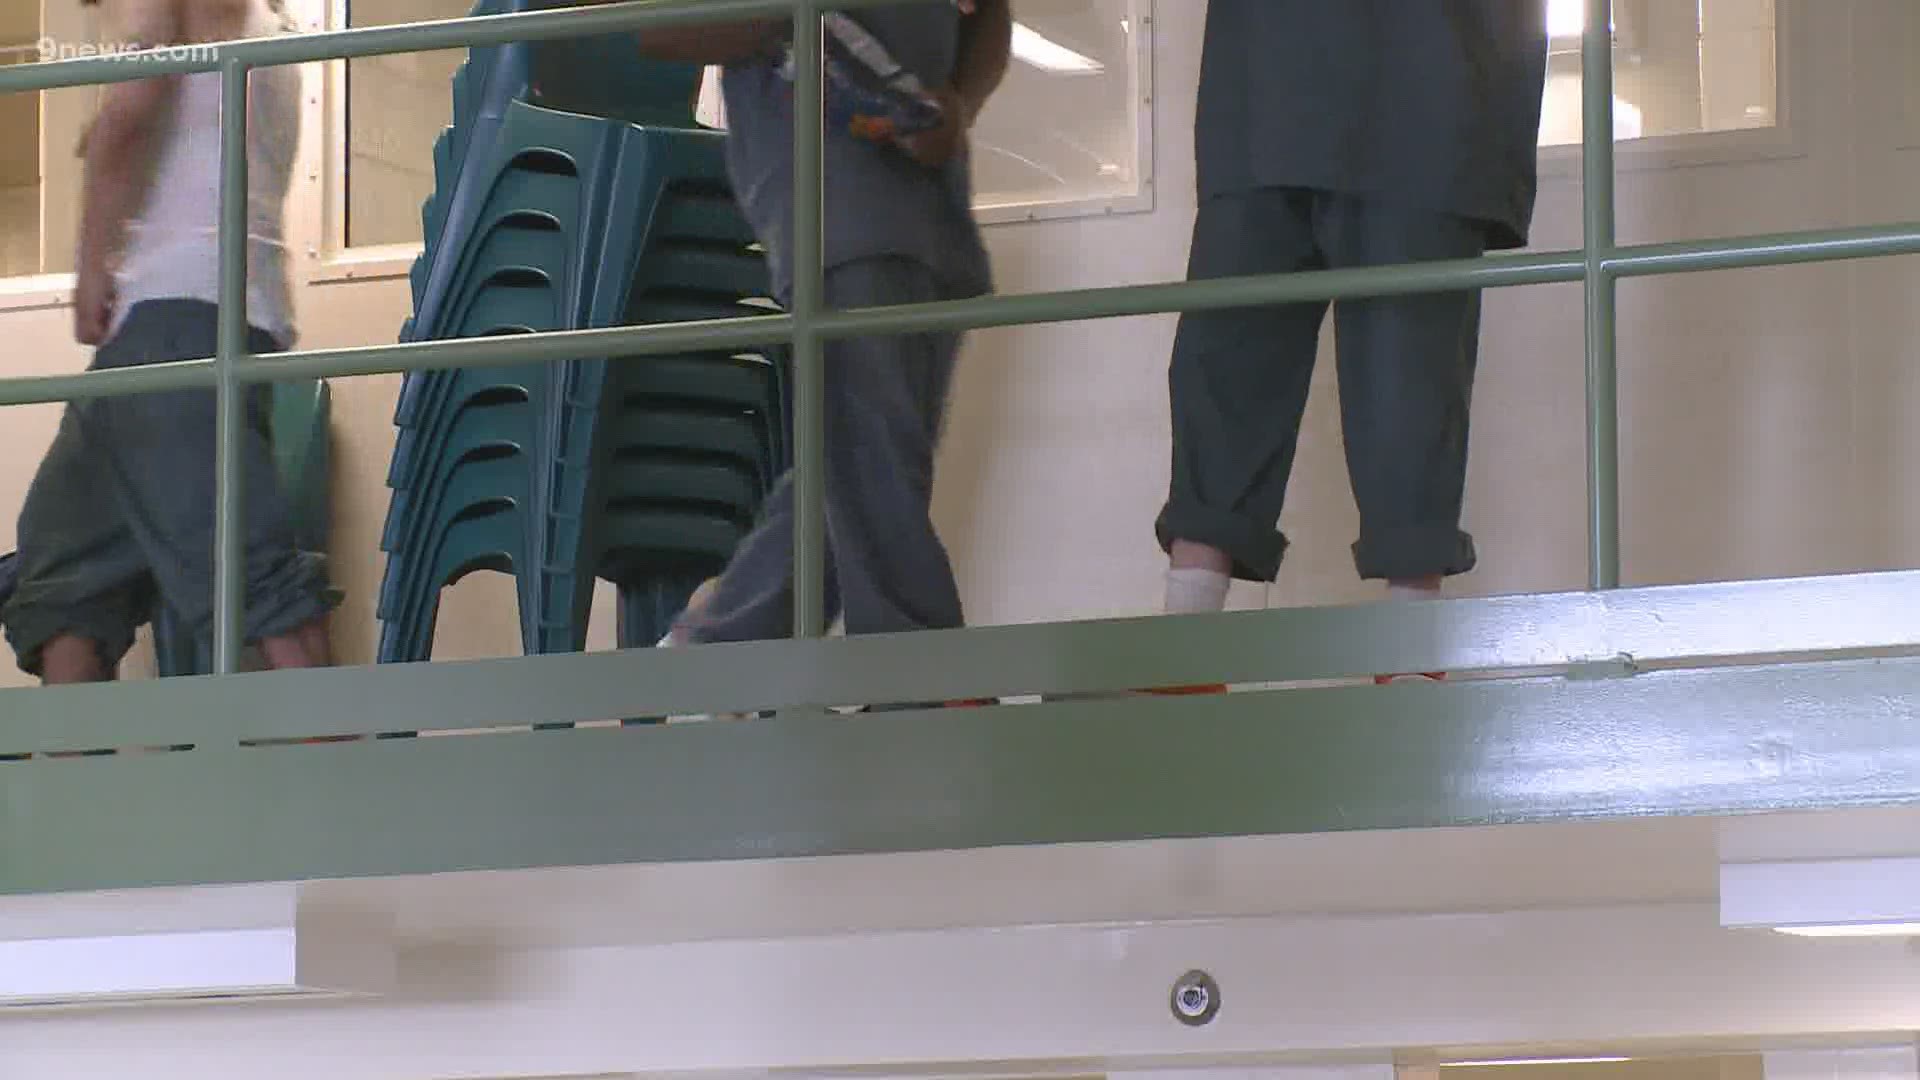 As of April 29, 22 inmates had been tested for COVID-19, with 10 inmates testing positive. In addition, 17 jail staff members had tested positive for COVID-19.